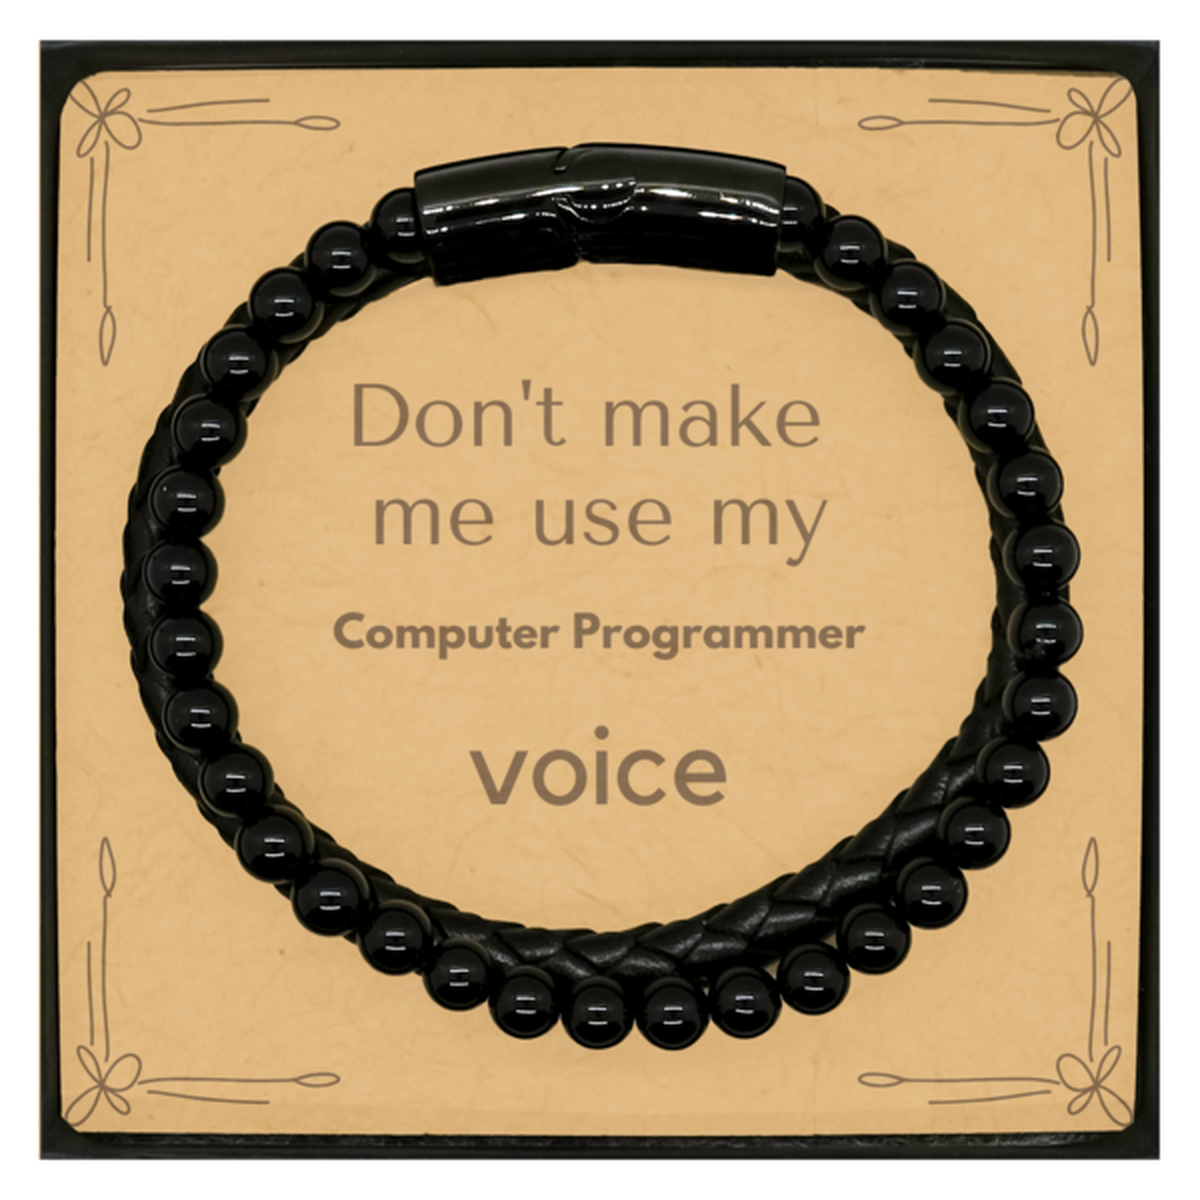 Don't make me use my Computer Programmer voice, Sarcasm Computer Programmer Card Gifts, Christmas Computer Programmer Stone Leather Bracelets Birthday Unique Gifts For Computer Programmer Coworkers, Men, Women, Colleague, Friends